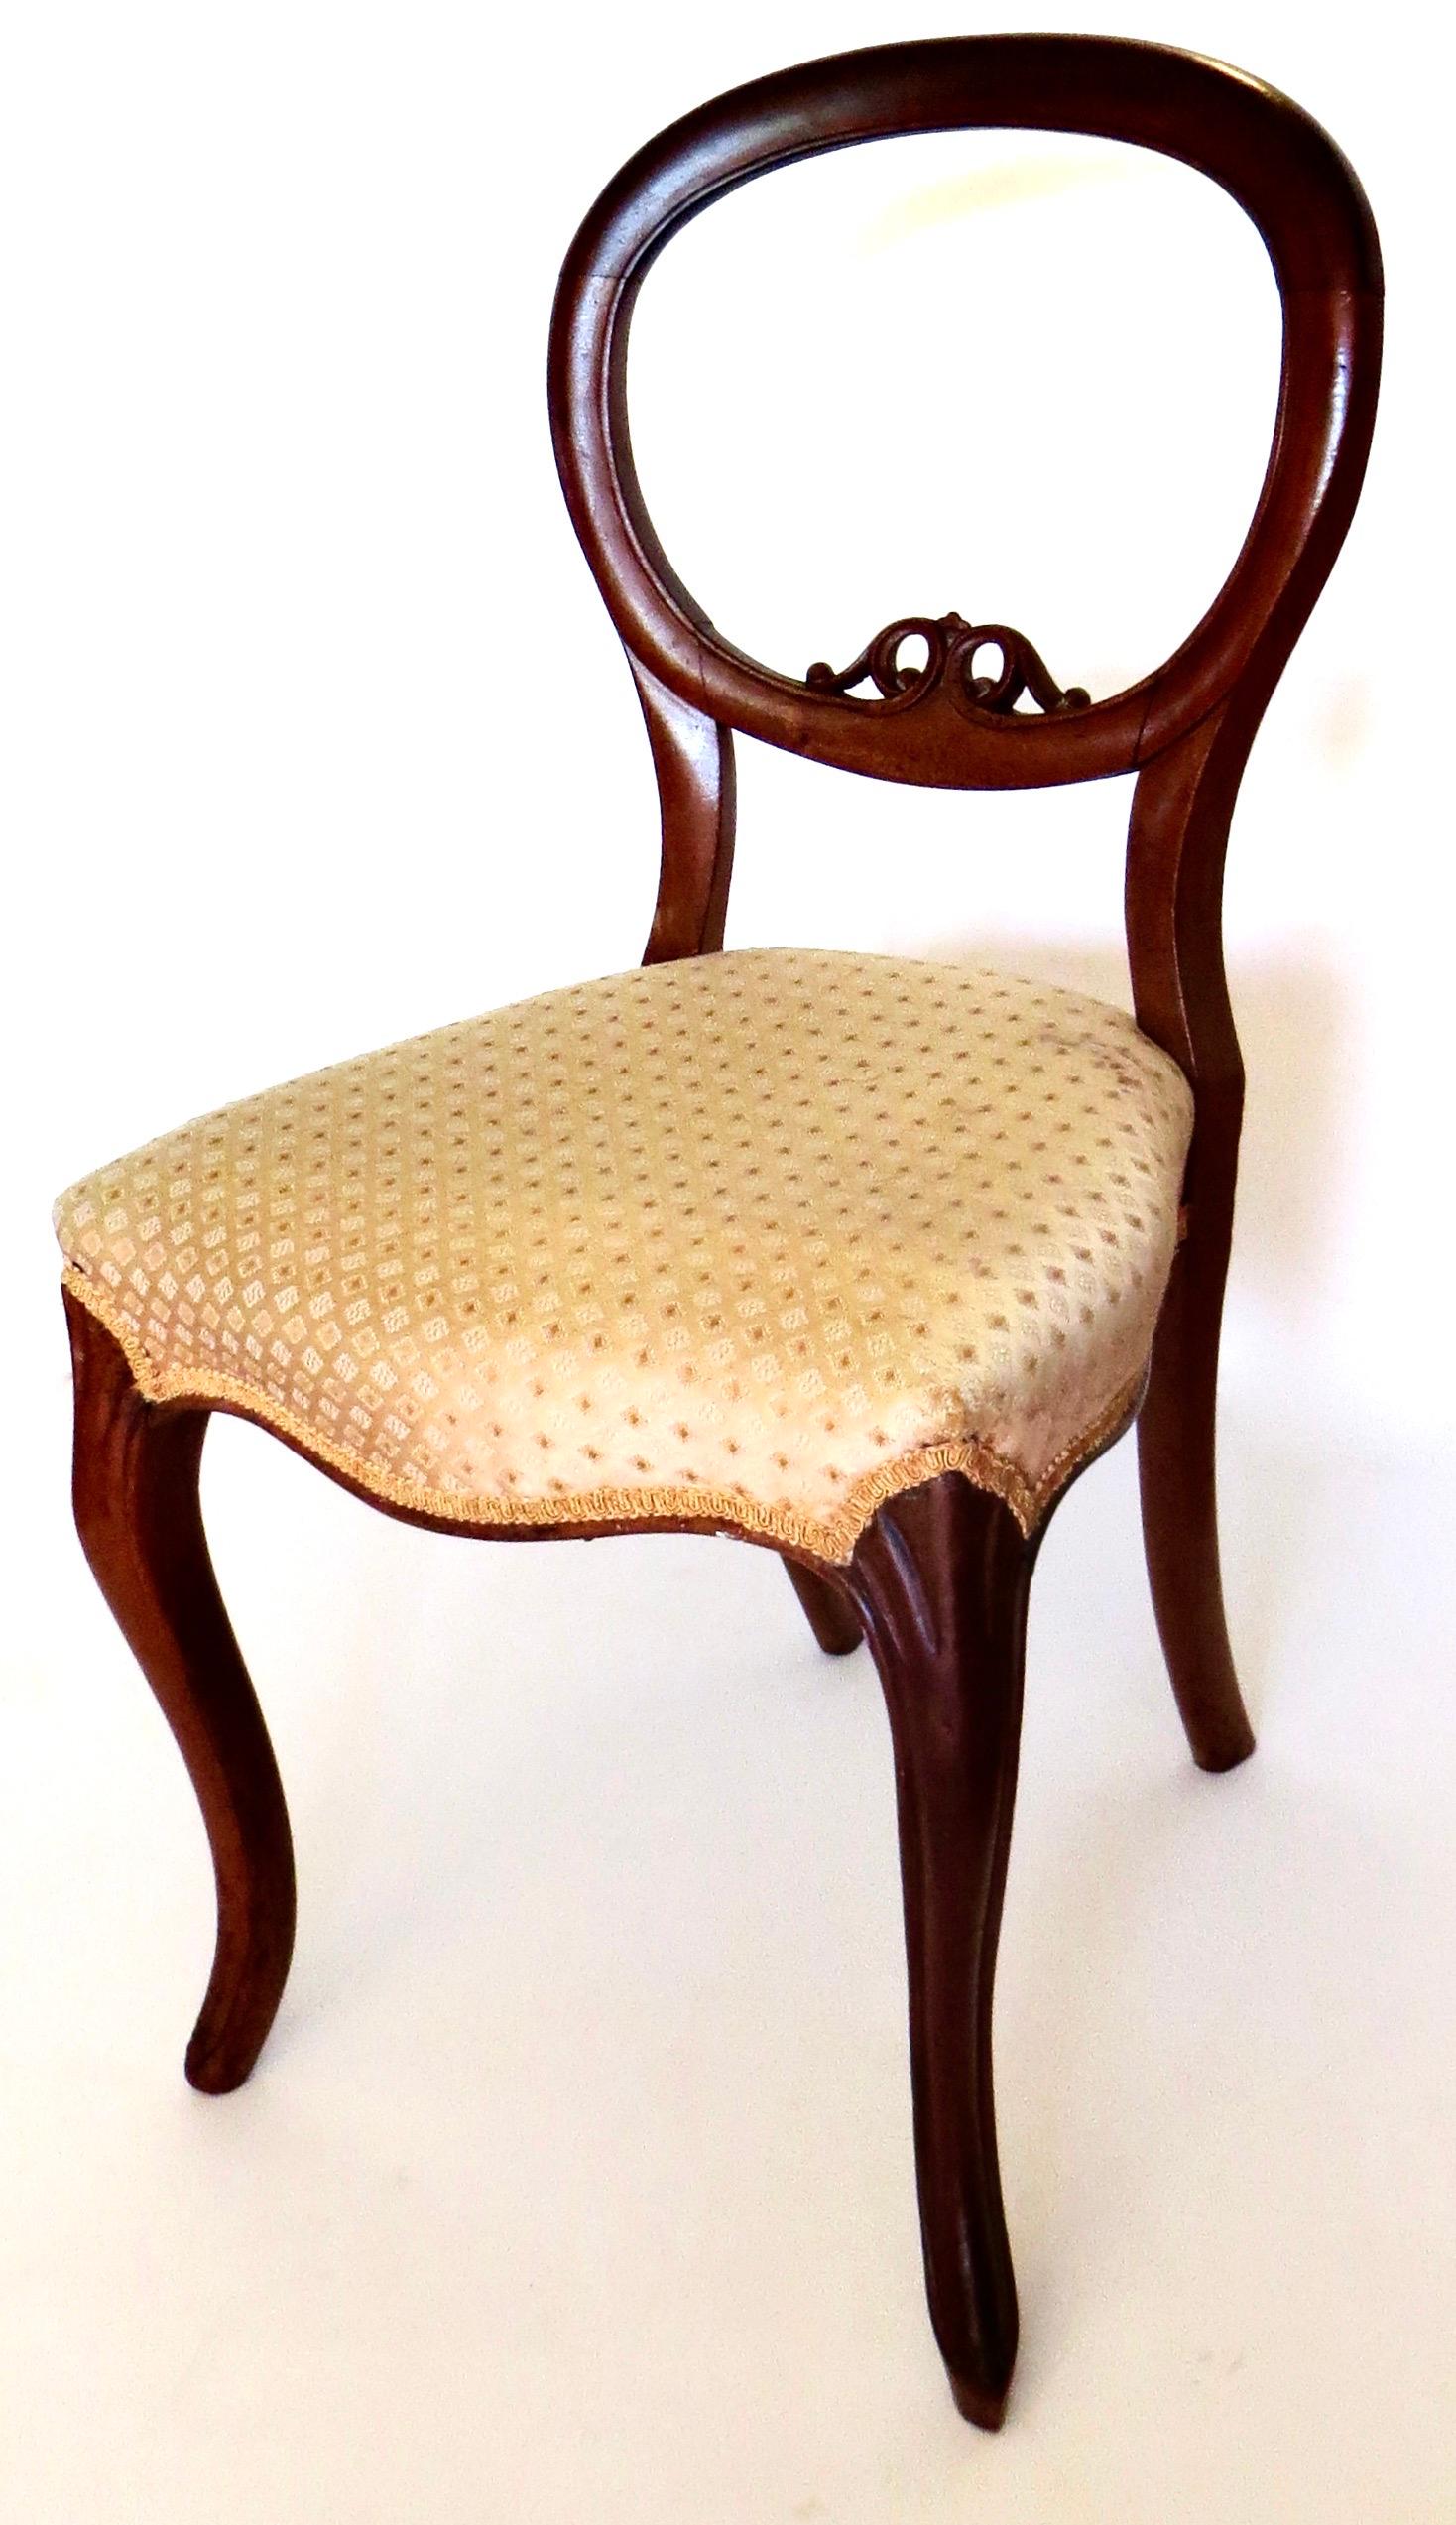 Typical English Balloon Back Chair used for the parlor, a lady's desk, or in the boudoire at a dressing table in mid-Victorian England. It has the round, or balloon shaped back; cabriole front legs with splayed rear legs; and a small crest to the